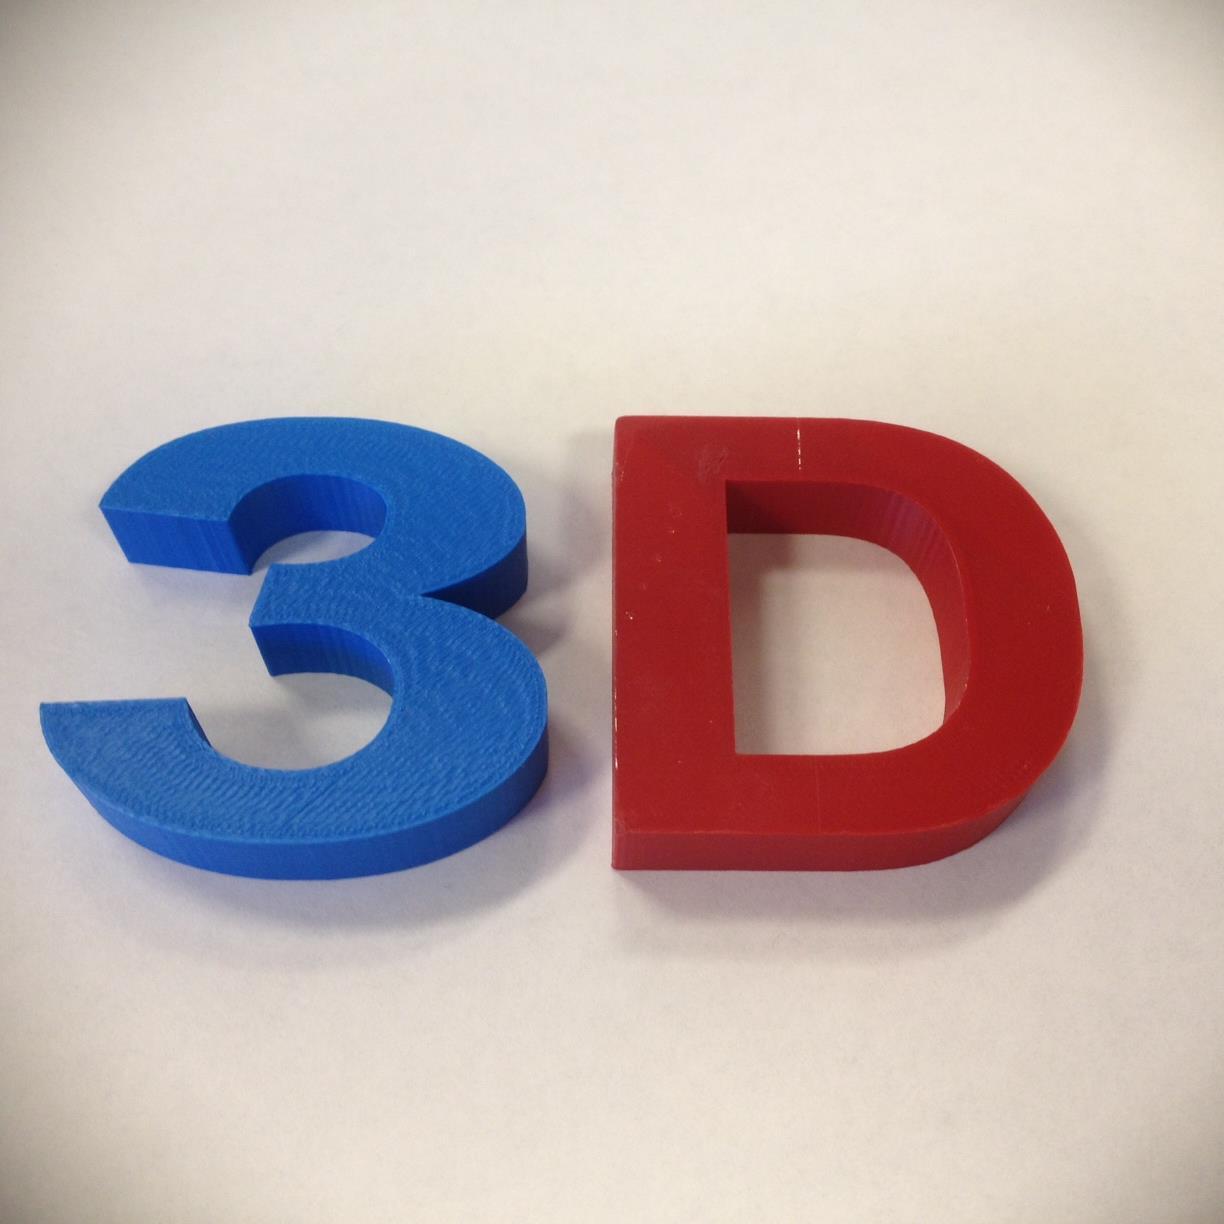 Gateway 3D Print offers quality ABS filament in a vibrant array of colour choices.